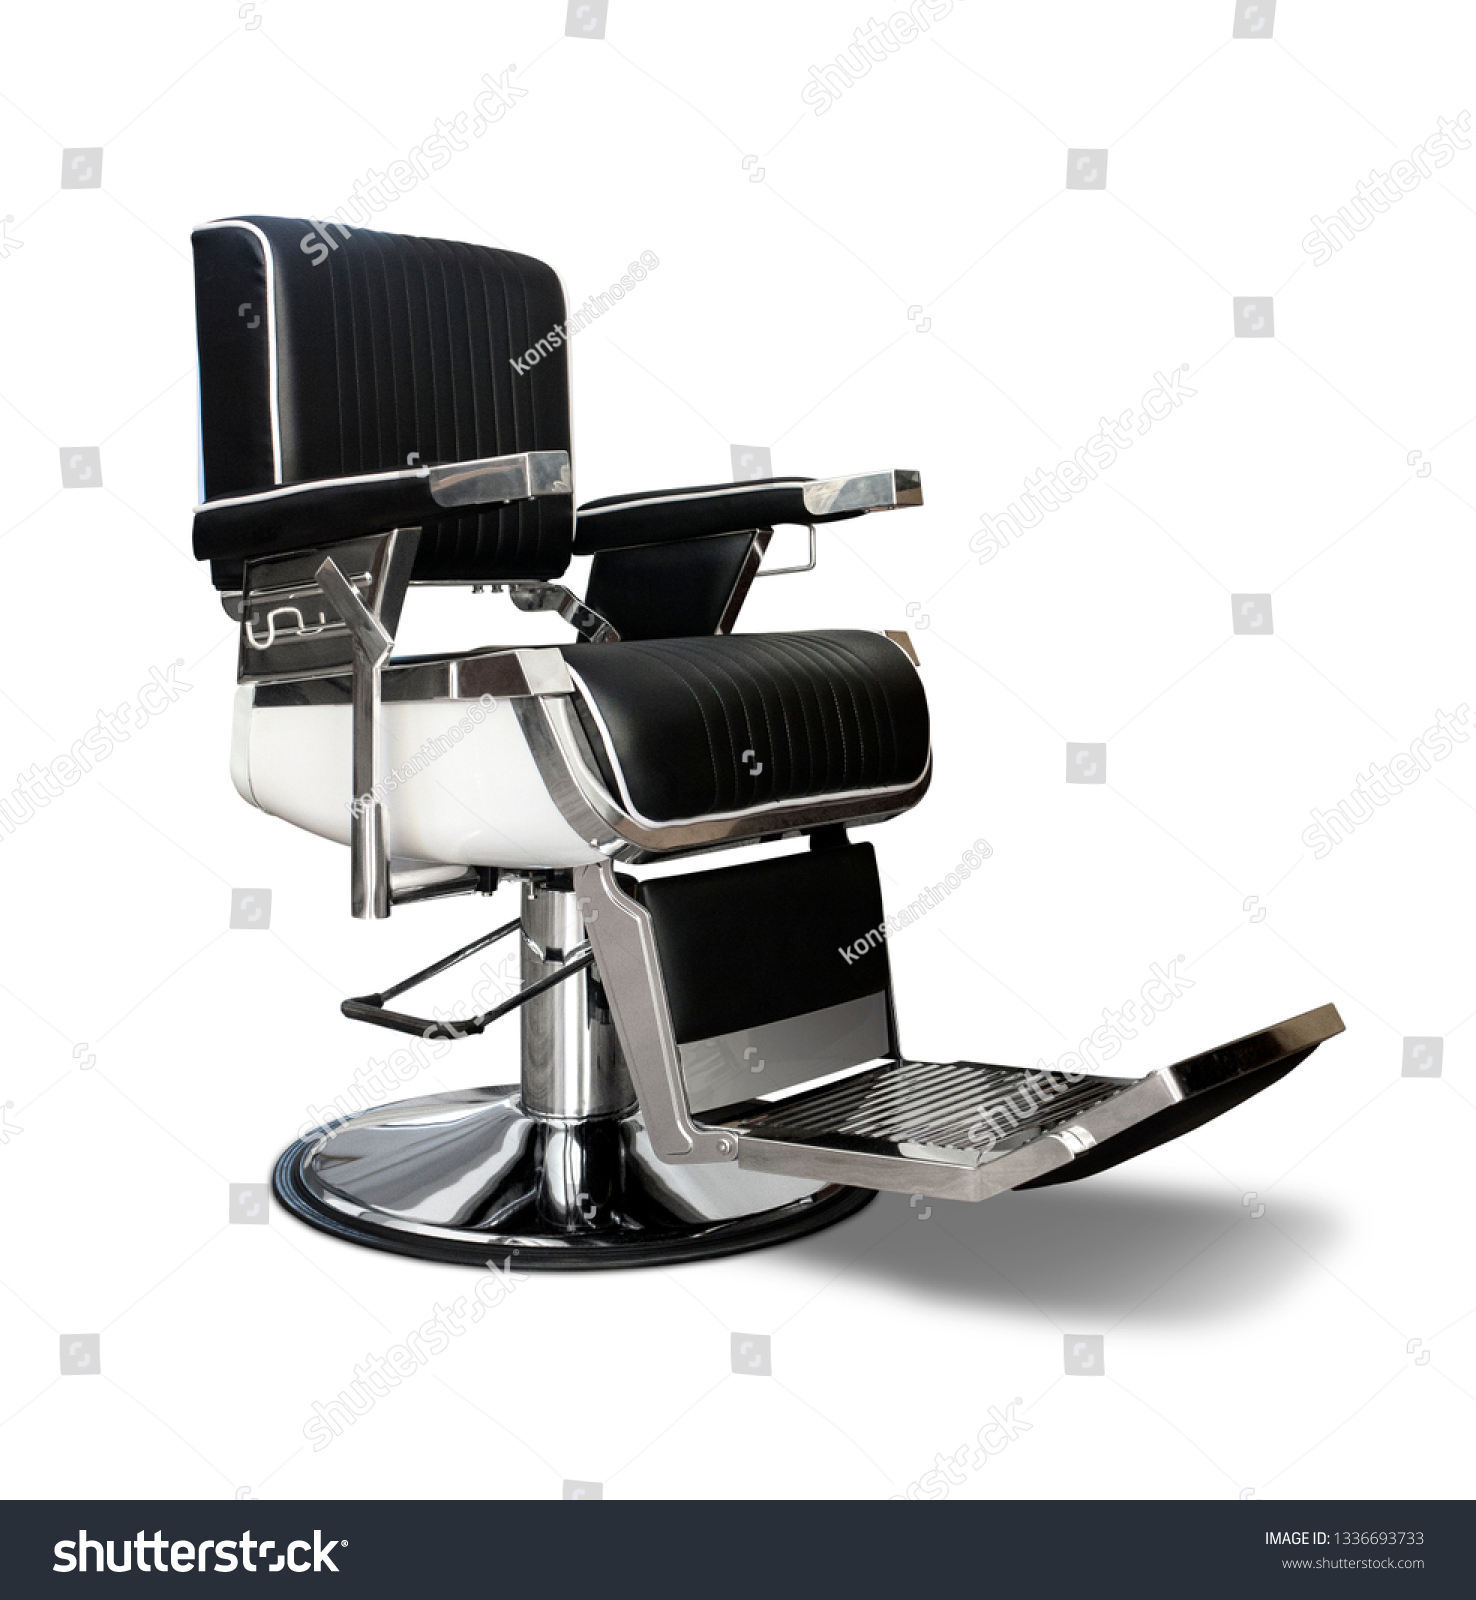 Barber chair isolated on white background	
 #1336693733